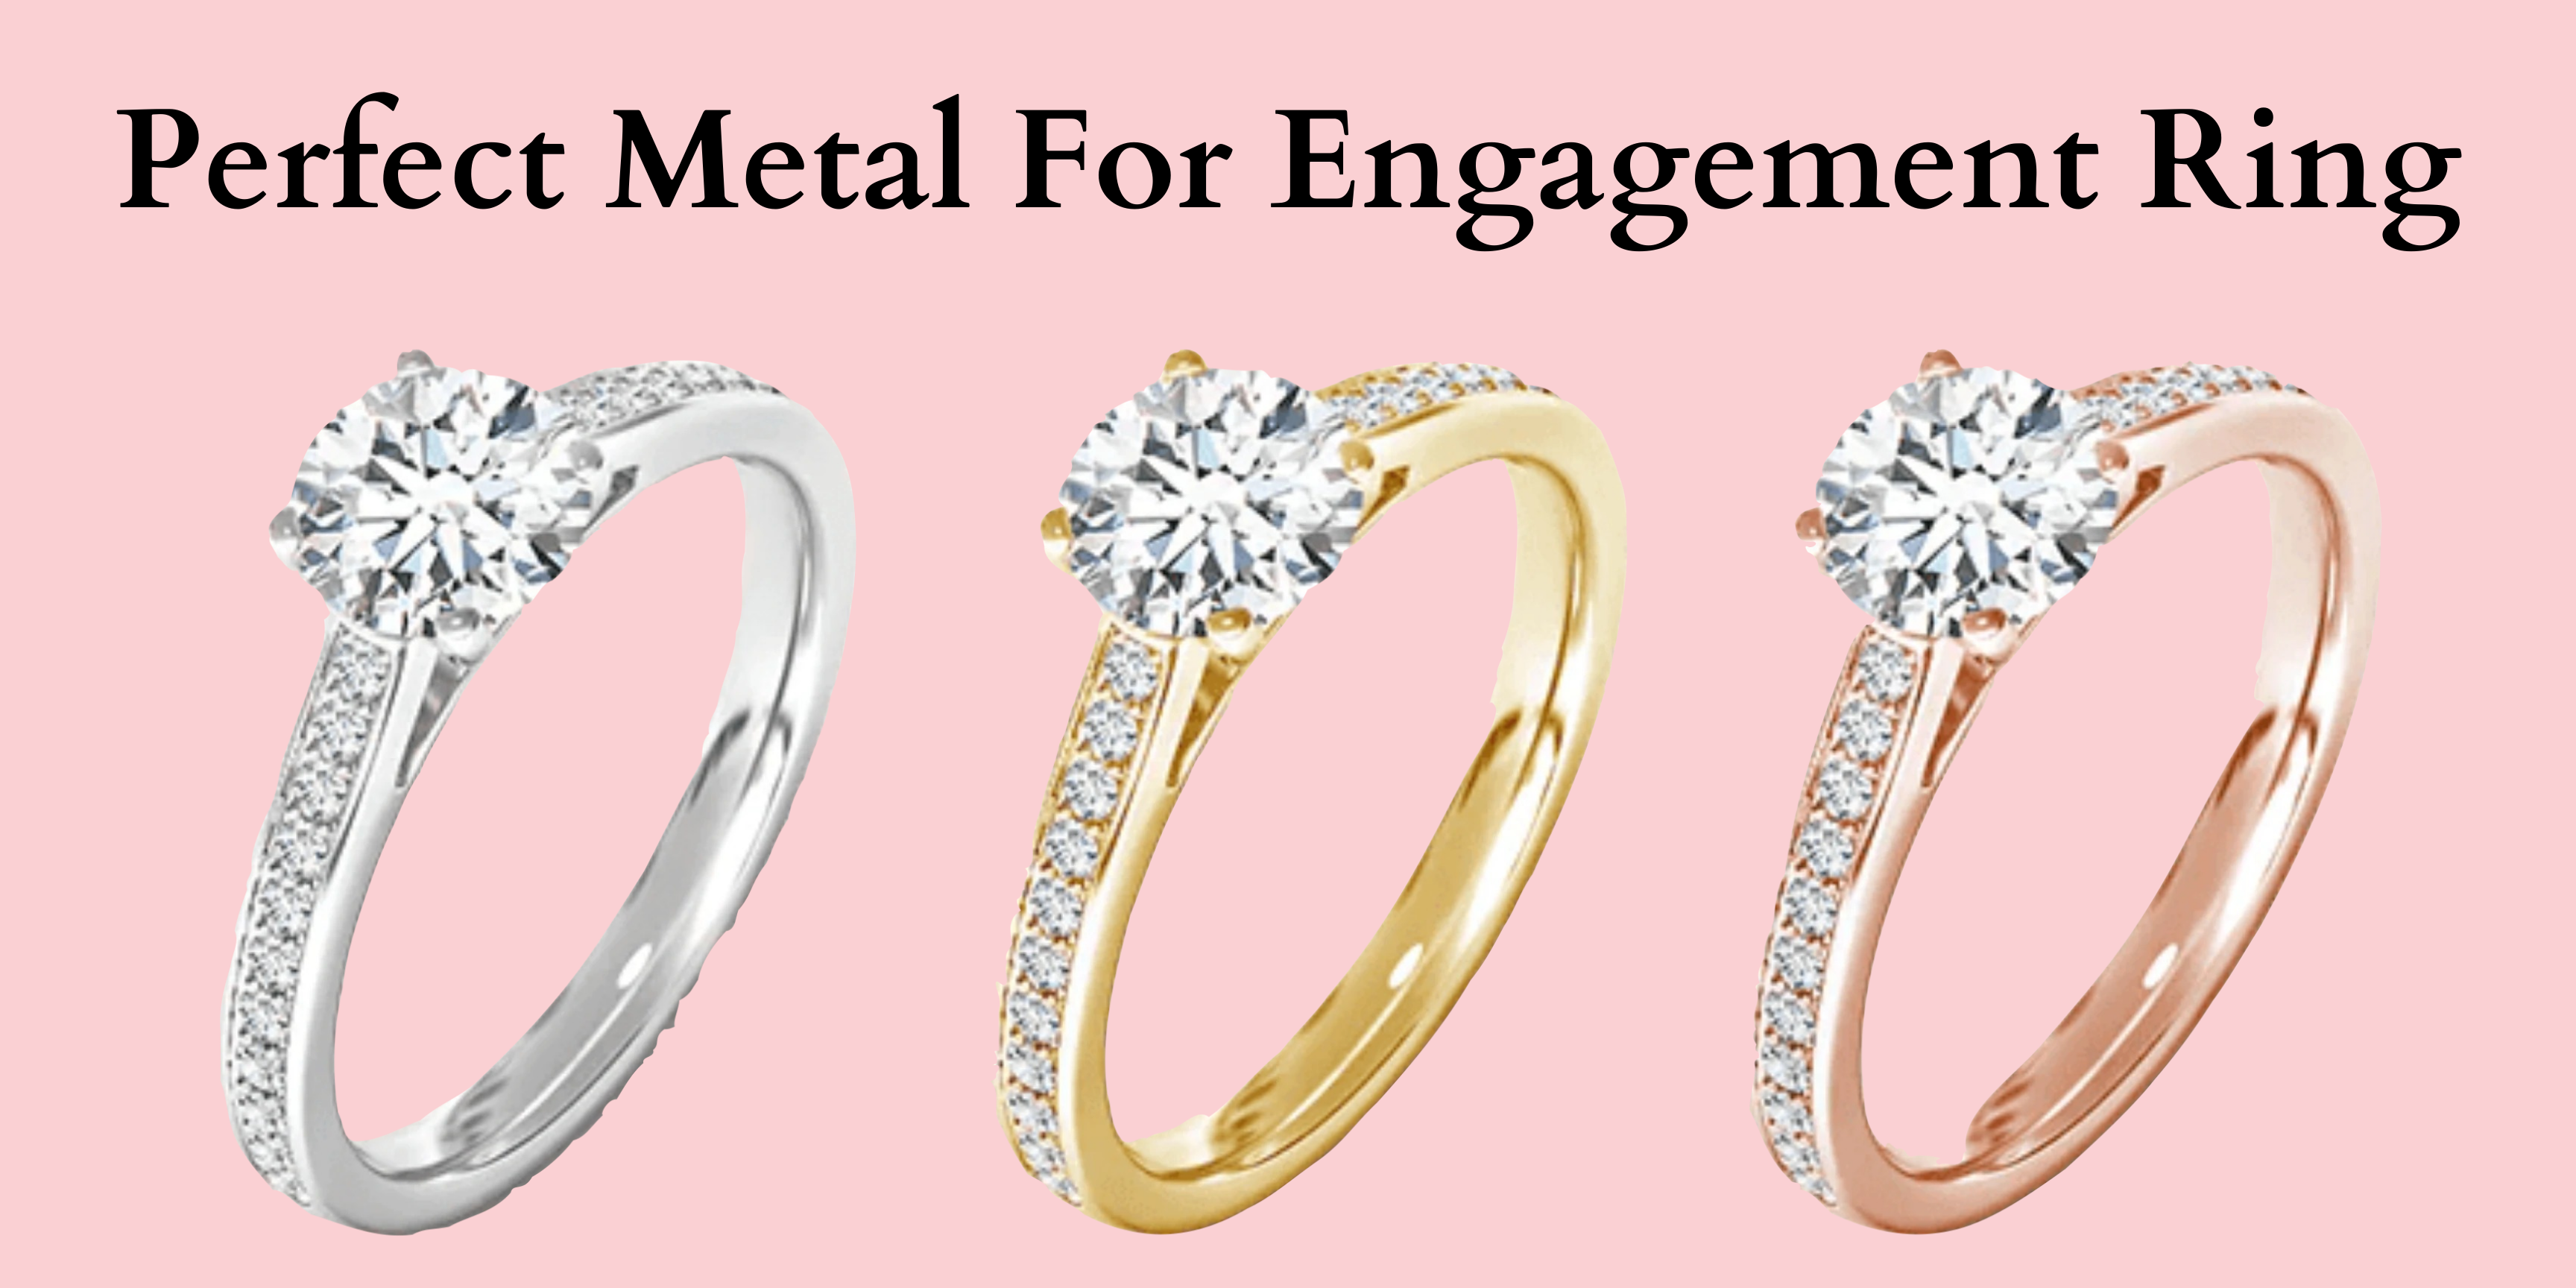 How to choosing the perfect metal for engagement ring?